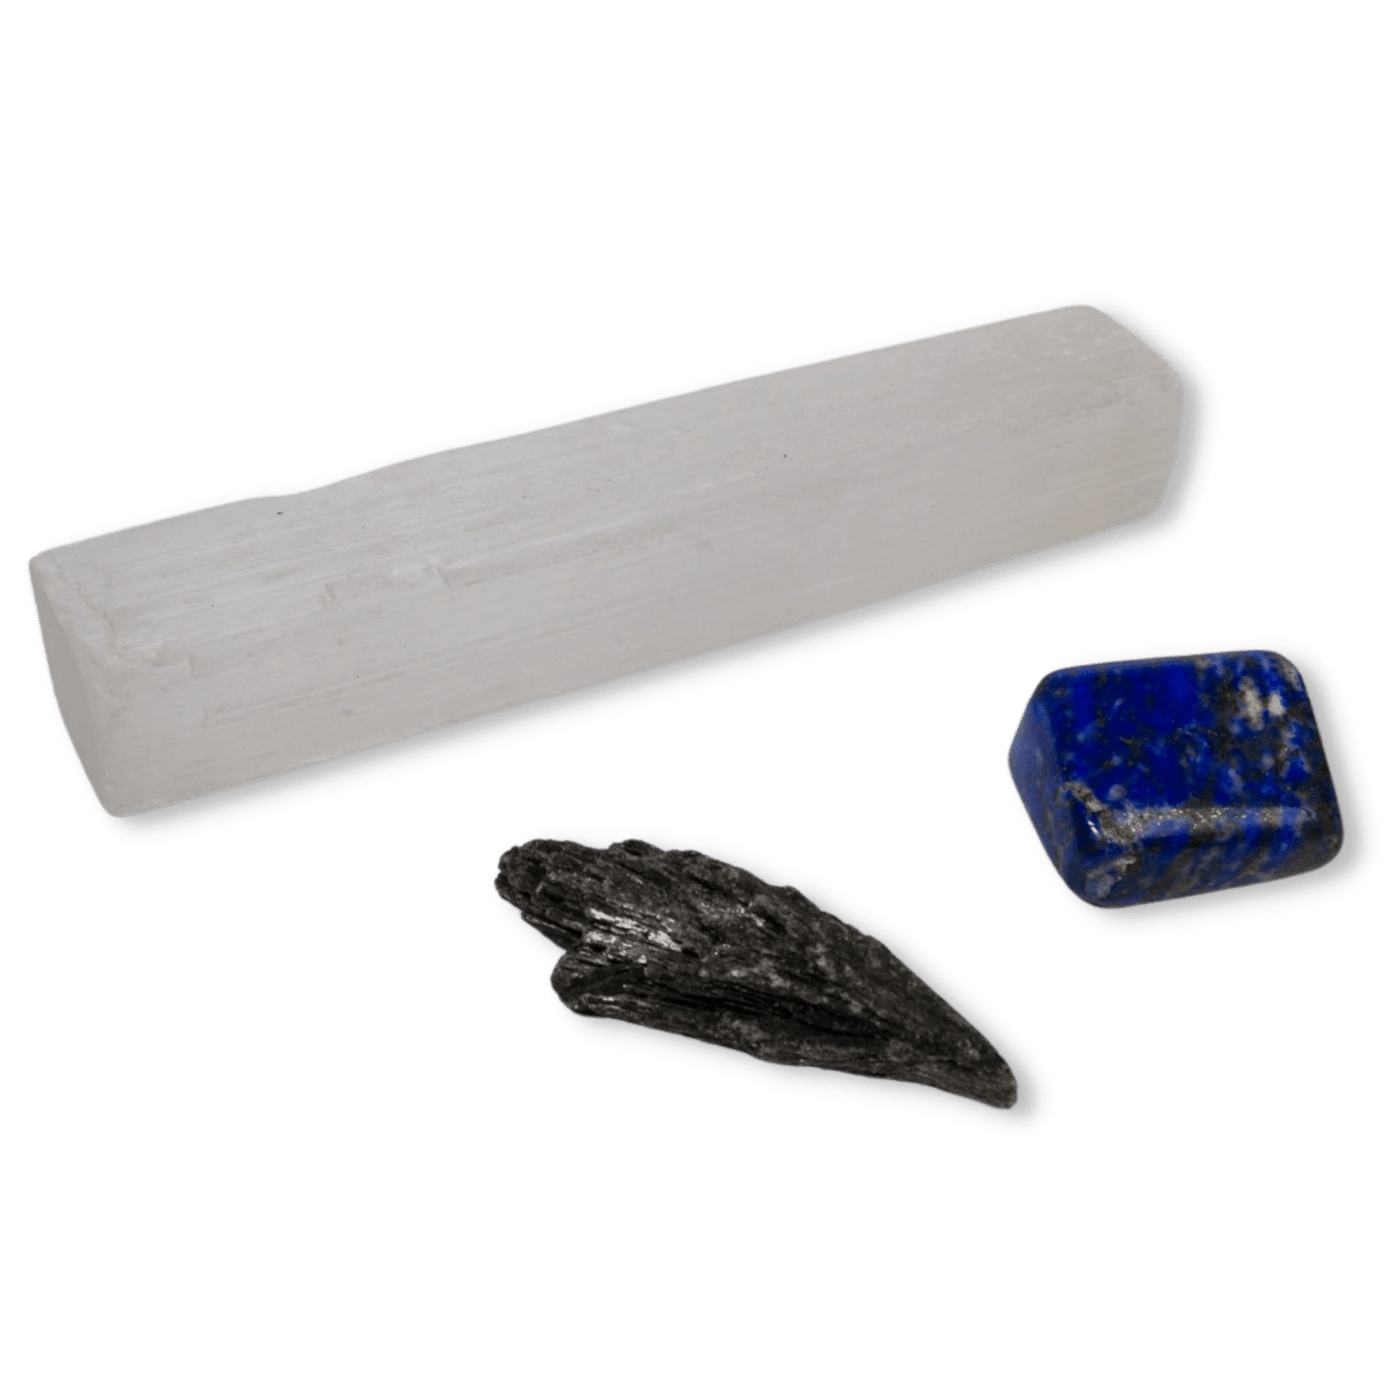 On-The-Go Protection Crystal Bundle comprising a Selenite (Satin spar) wand, Black Kyanite fan crystal and Lapis Lazuli tumbled stone by Energy Muse